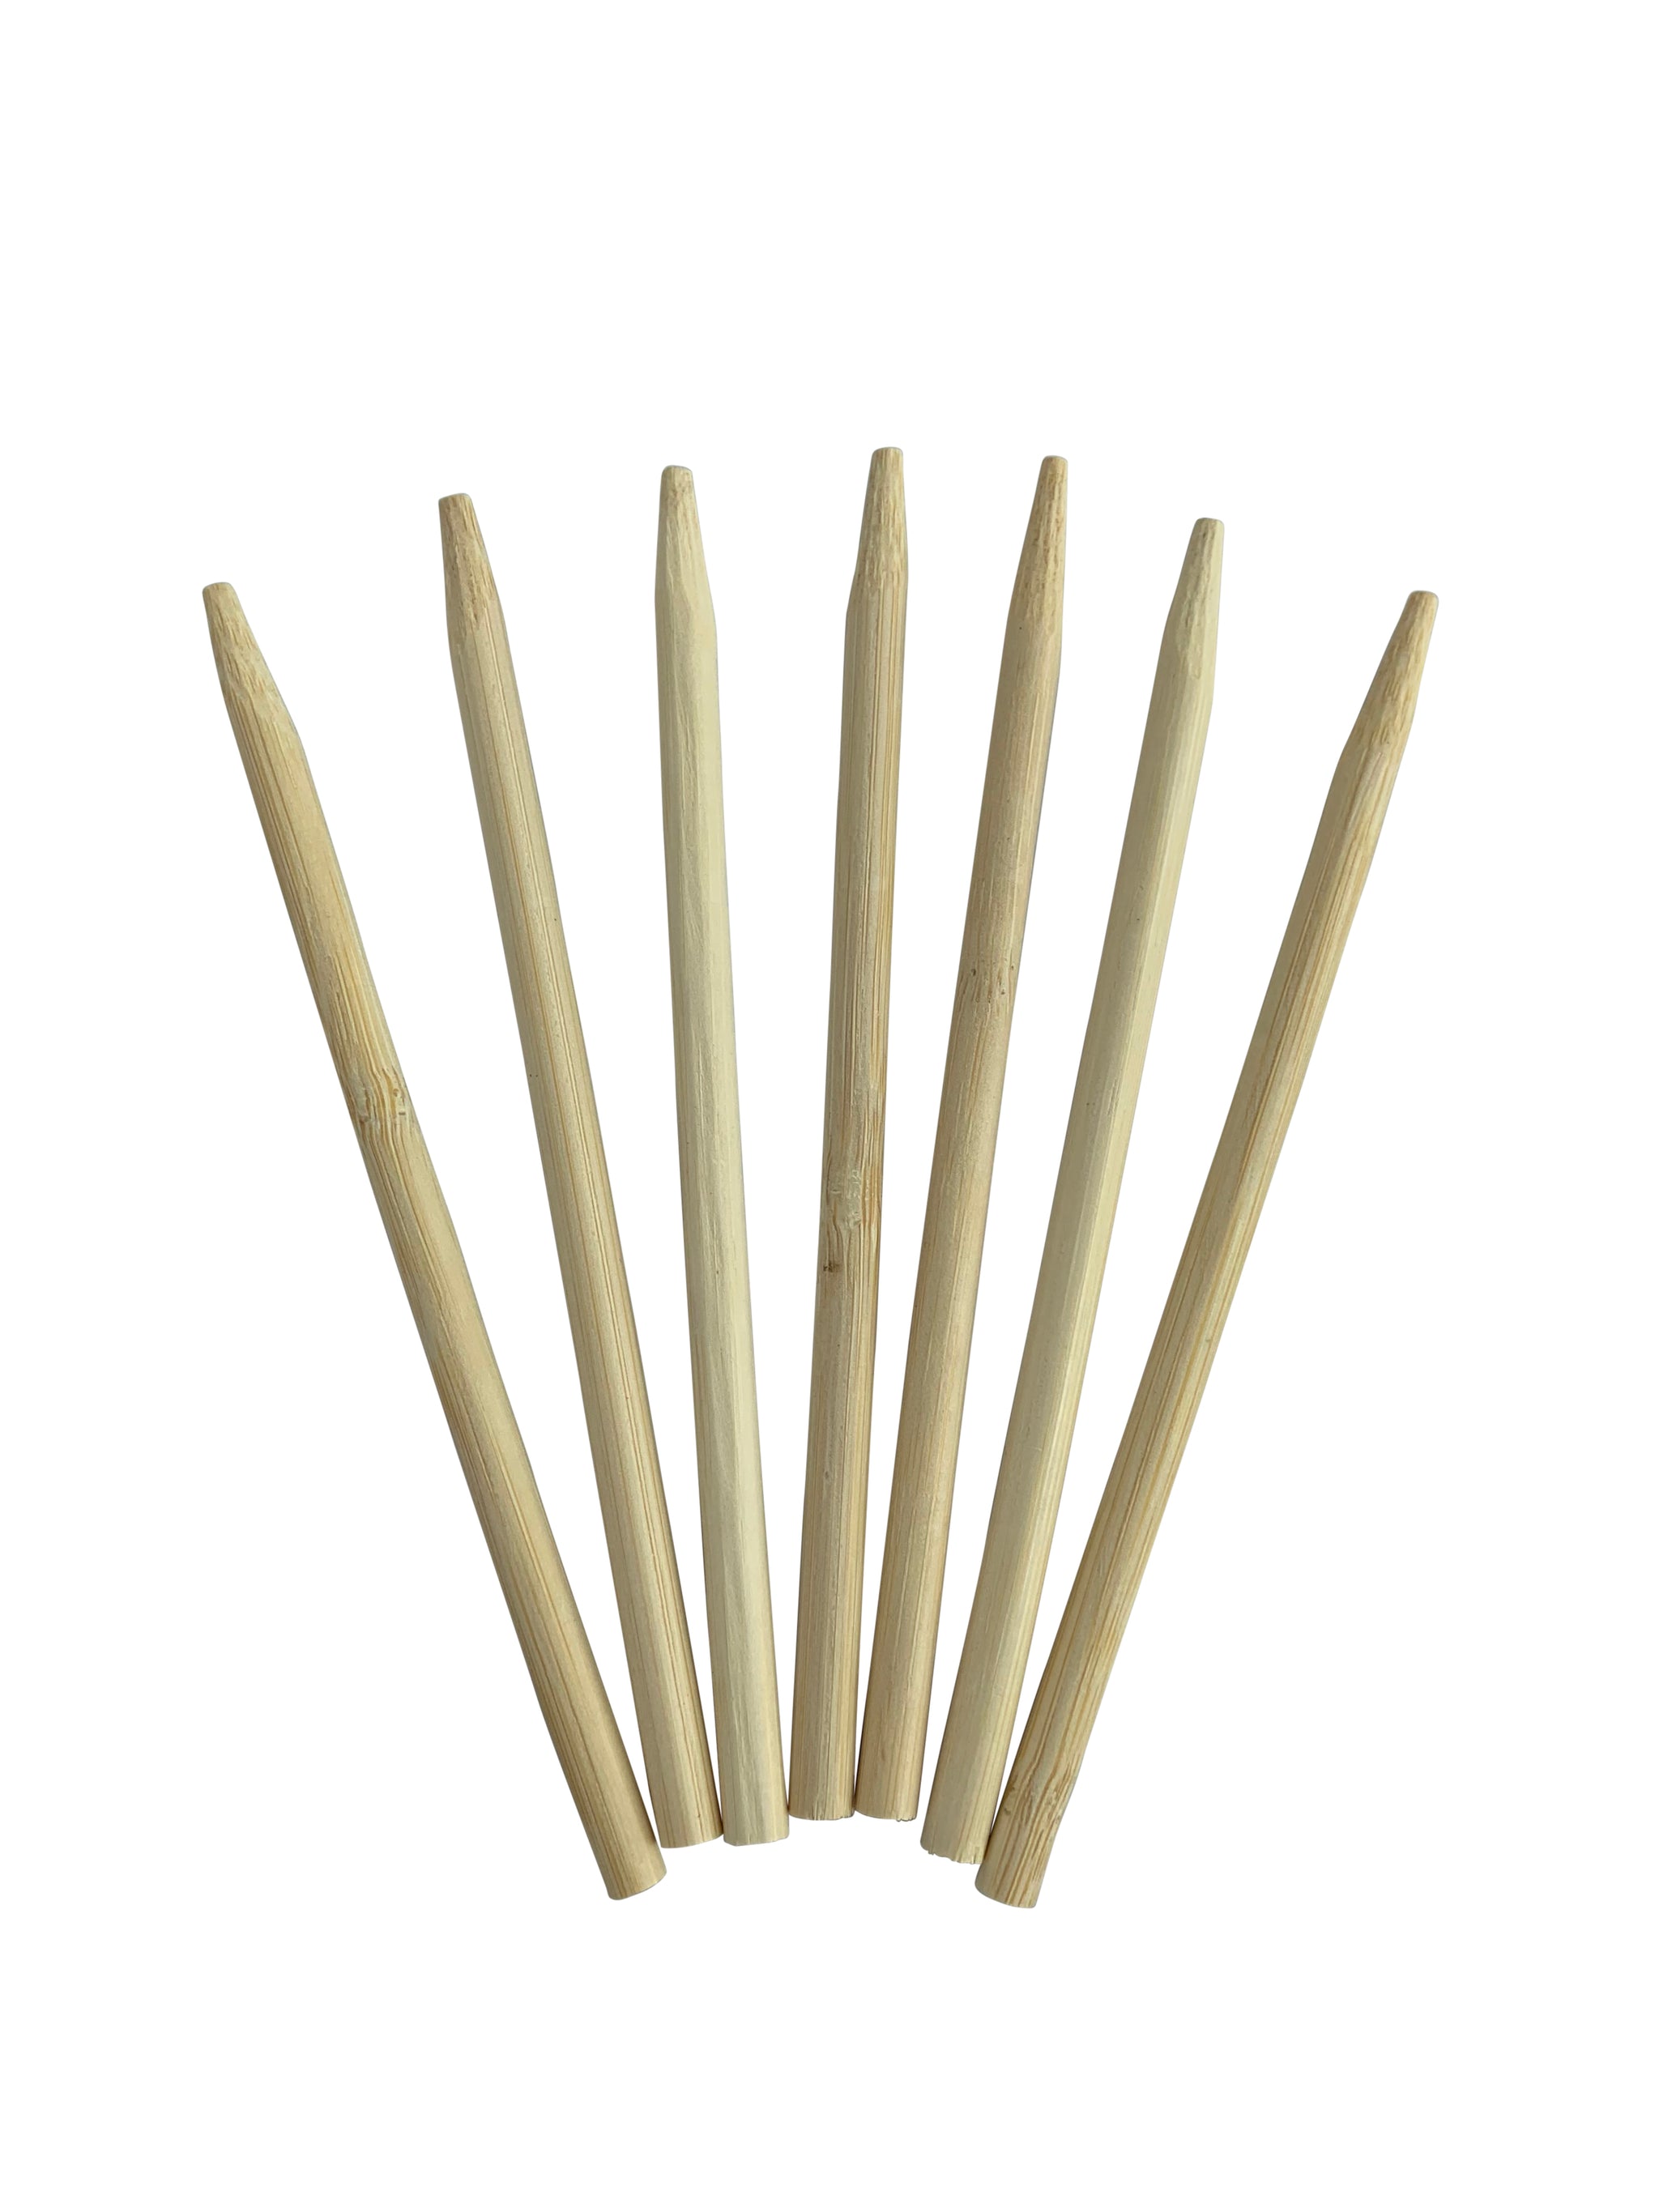 KingSeal Natural Bamboo Wood Candy Apple Skewers, Sticks, 5.5 Inch, 6 ...